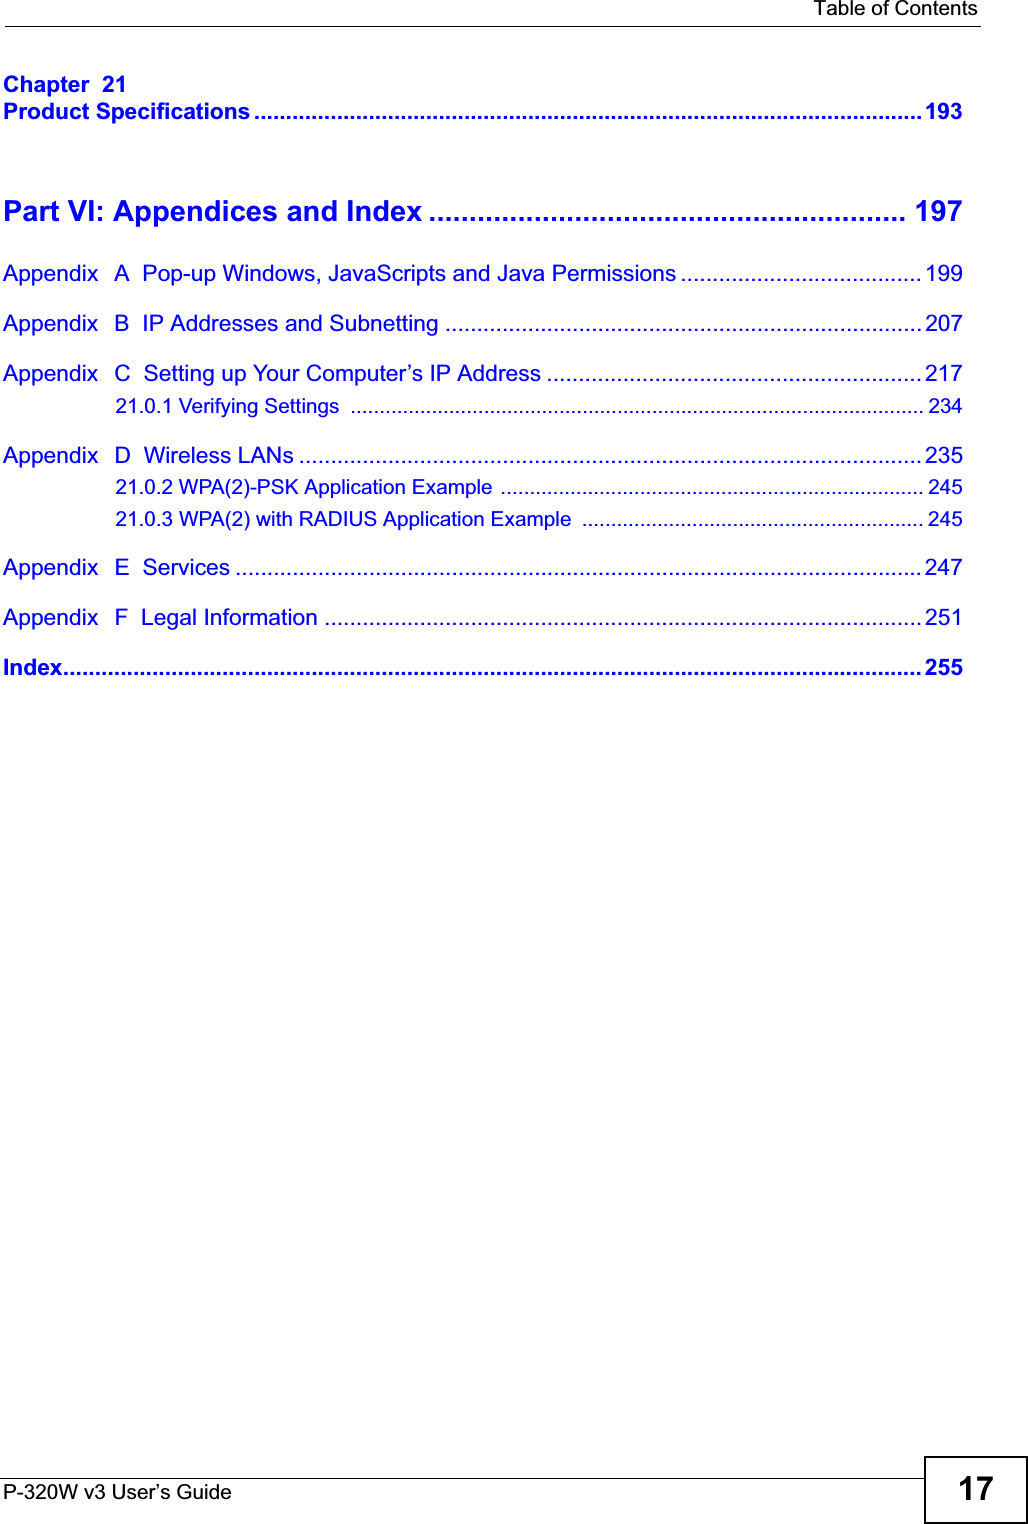   Table of ContentsP-320W v3 User’s Guide 17Chapter  21Product Specifications .........................................................................................................193Part VI: Appendices and Index ........................................................... 197Appendix   A  Pop-up Windows, JavaScripts and Java Permissions ...................................... 199Appendix   B  IP Addresses and Subnetting ...........................................................................207Appendix   C  Setting up Your Computer’s IP Address ........................................................... 21721.0.1 Verifying Settings  ................................................................................................... 234Appendix   D  Wireless LANs .................................................................................................. 23521.0.2 WPA(2)-PSK Application Example ......................................................................... 24521.0.3 WPA(2) with RADIUS Application Example  ........................................................... 245Appendix   E  Services ............................................................................................................ 247Appendix   F  Legal Information .............................................................................................. 251Index....................................................................................................................................... 255